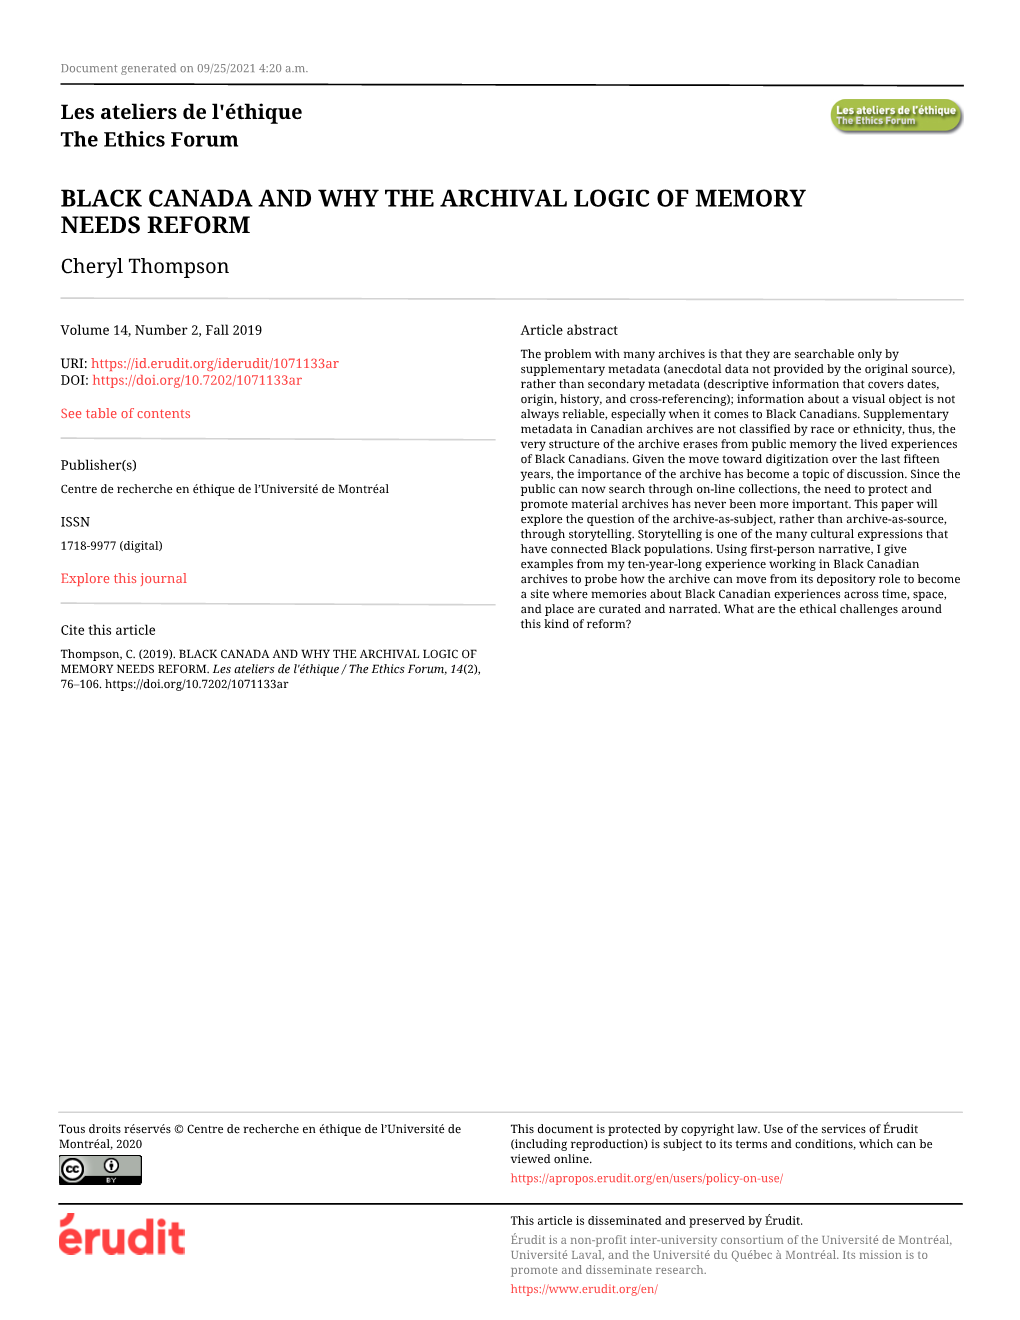 BLACK CANADA and WHY the ARCHIVAL LOGIC of MEMORY NEEDS REFORM Cheryl Thompson